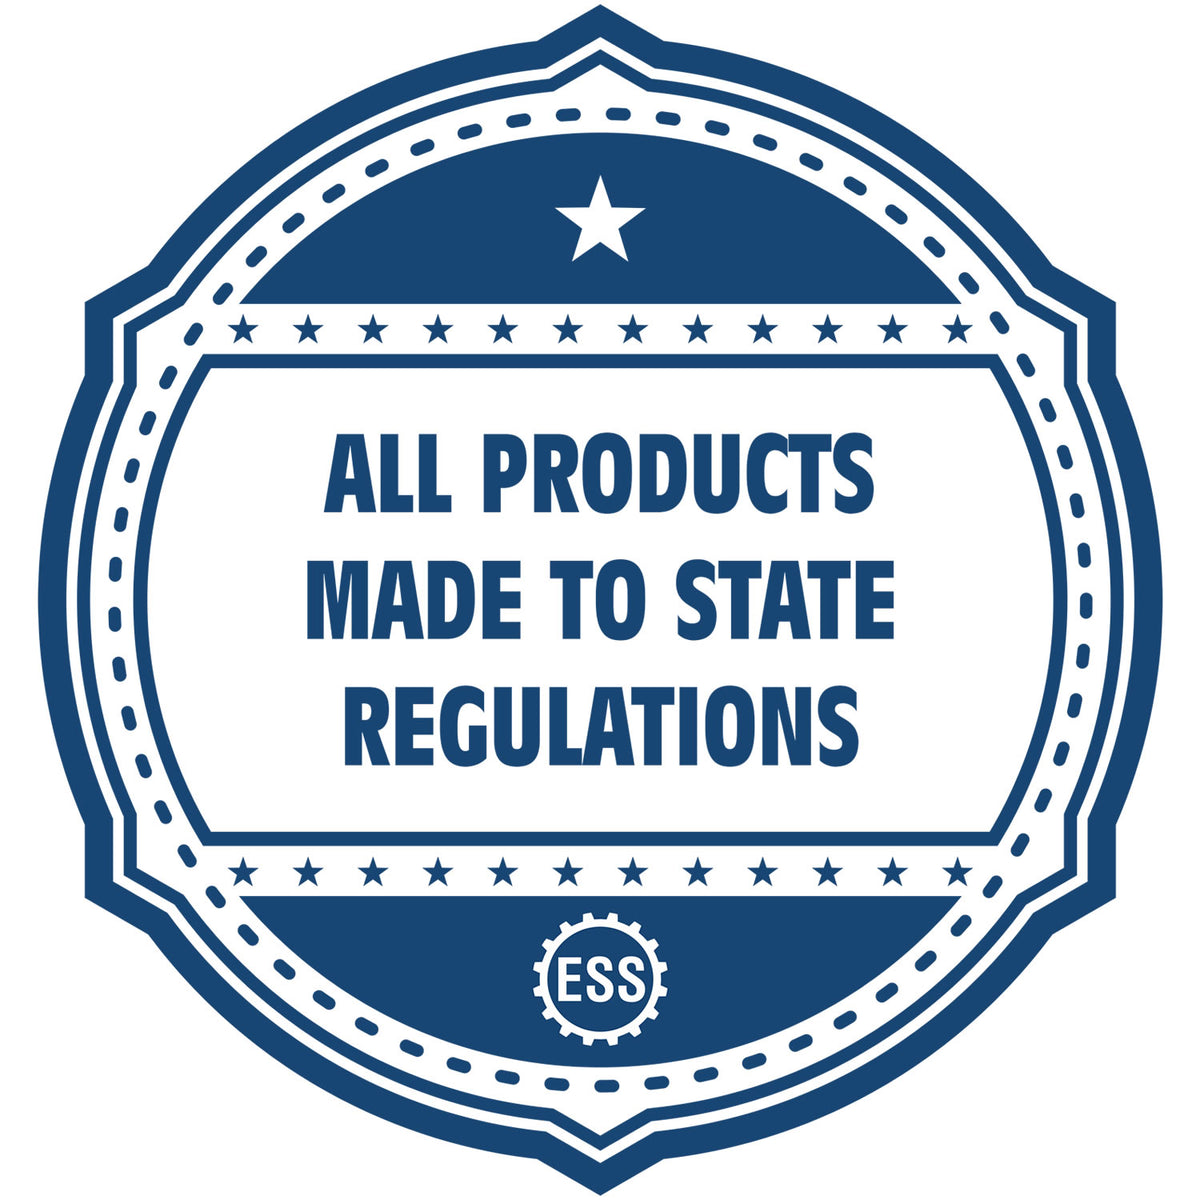 A blue icon or badge for the Self-Inking Colorado Geologist Stamp showing that this product is made in compliance with state regulations.